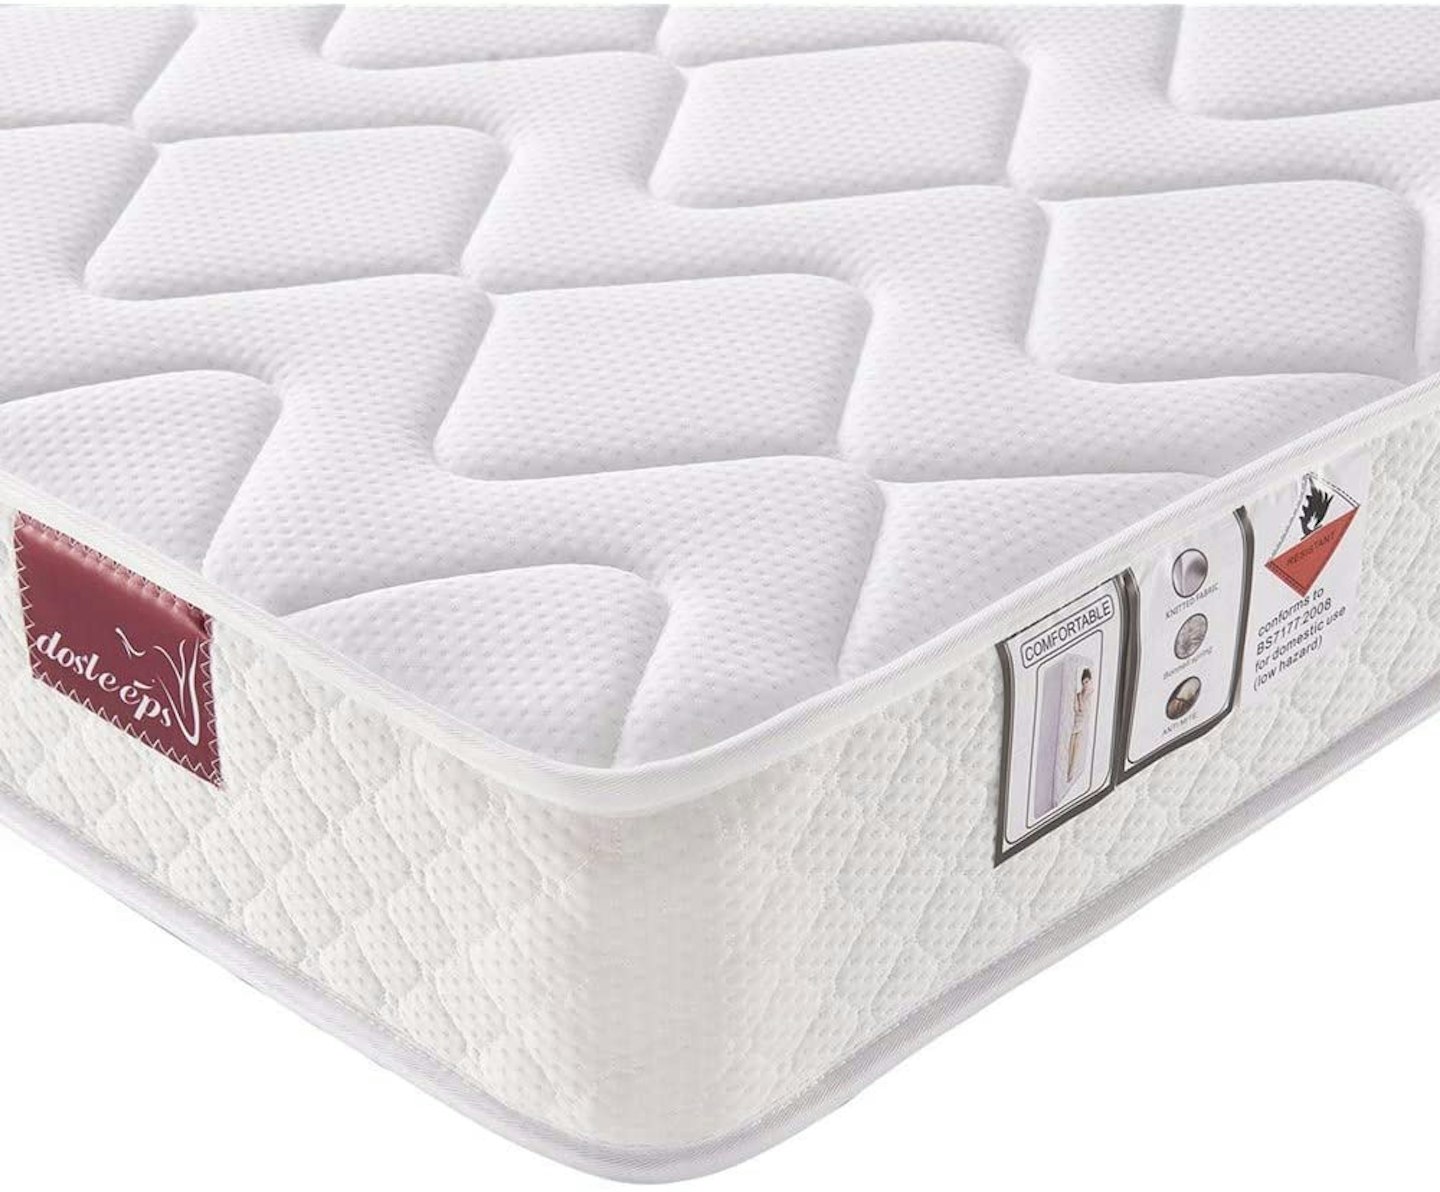 DOSLEEPS 9-Zone Inner Spring Bed Mattress with Foam and 3D Breathable Fabric